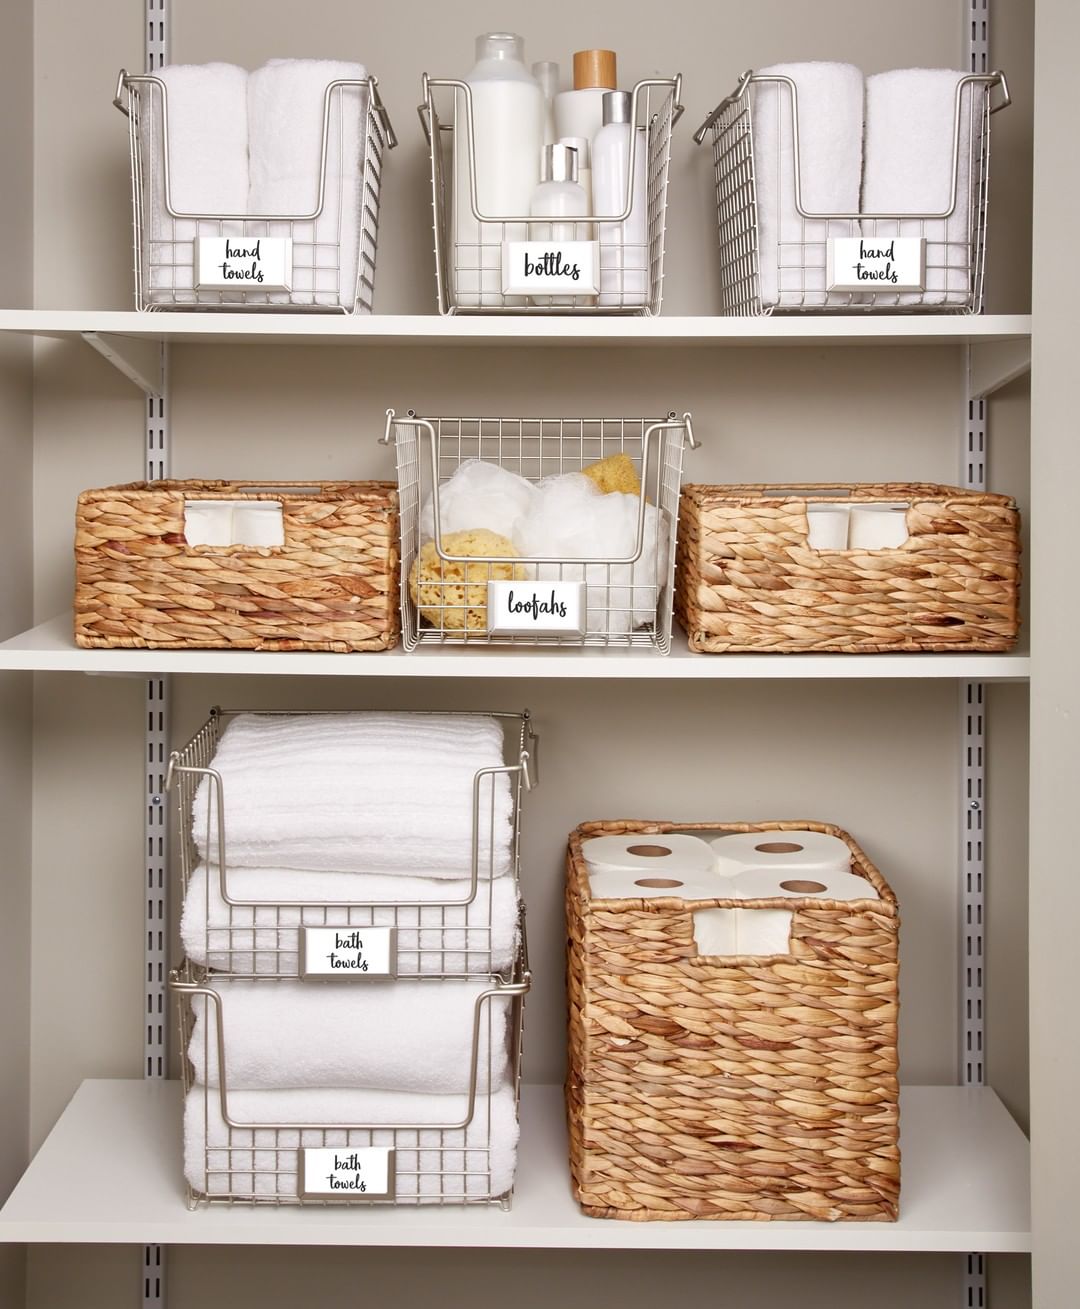 Towels and Toiletries Stored in Decorative Bins in Linen Closet. Photo by Instagram user @idlivesimply